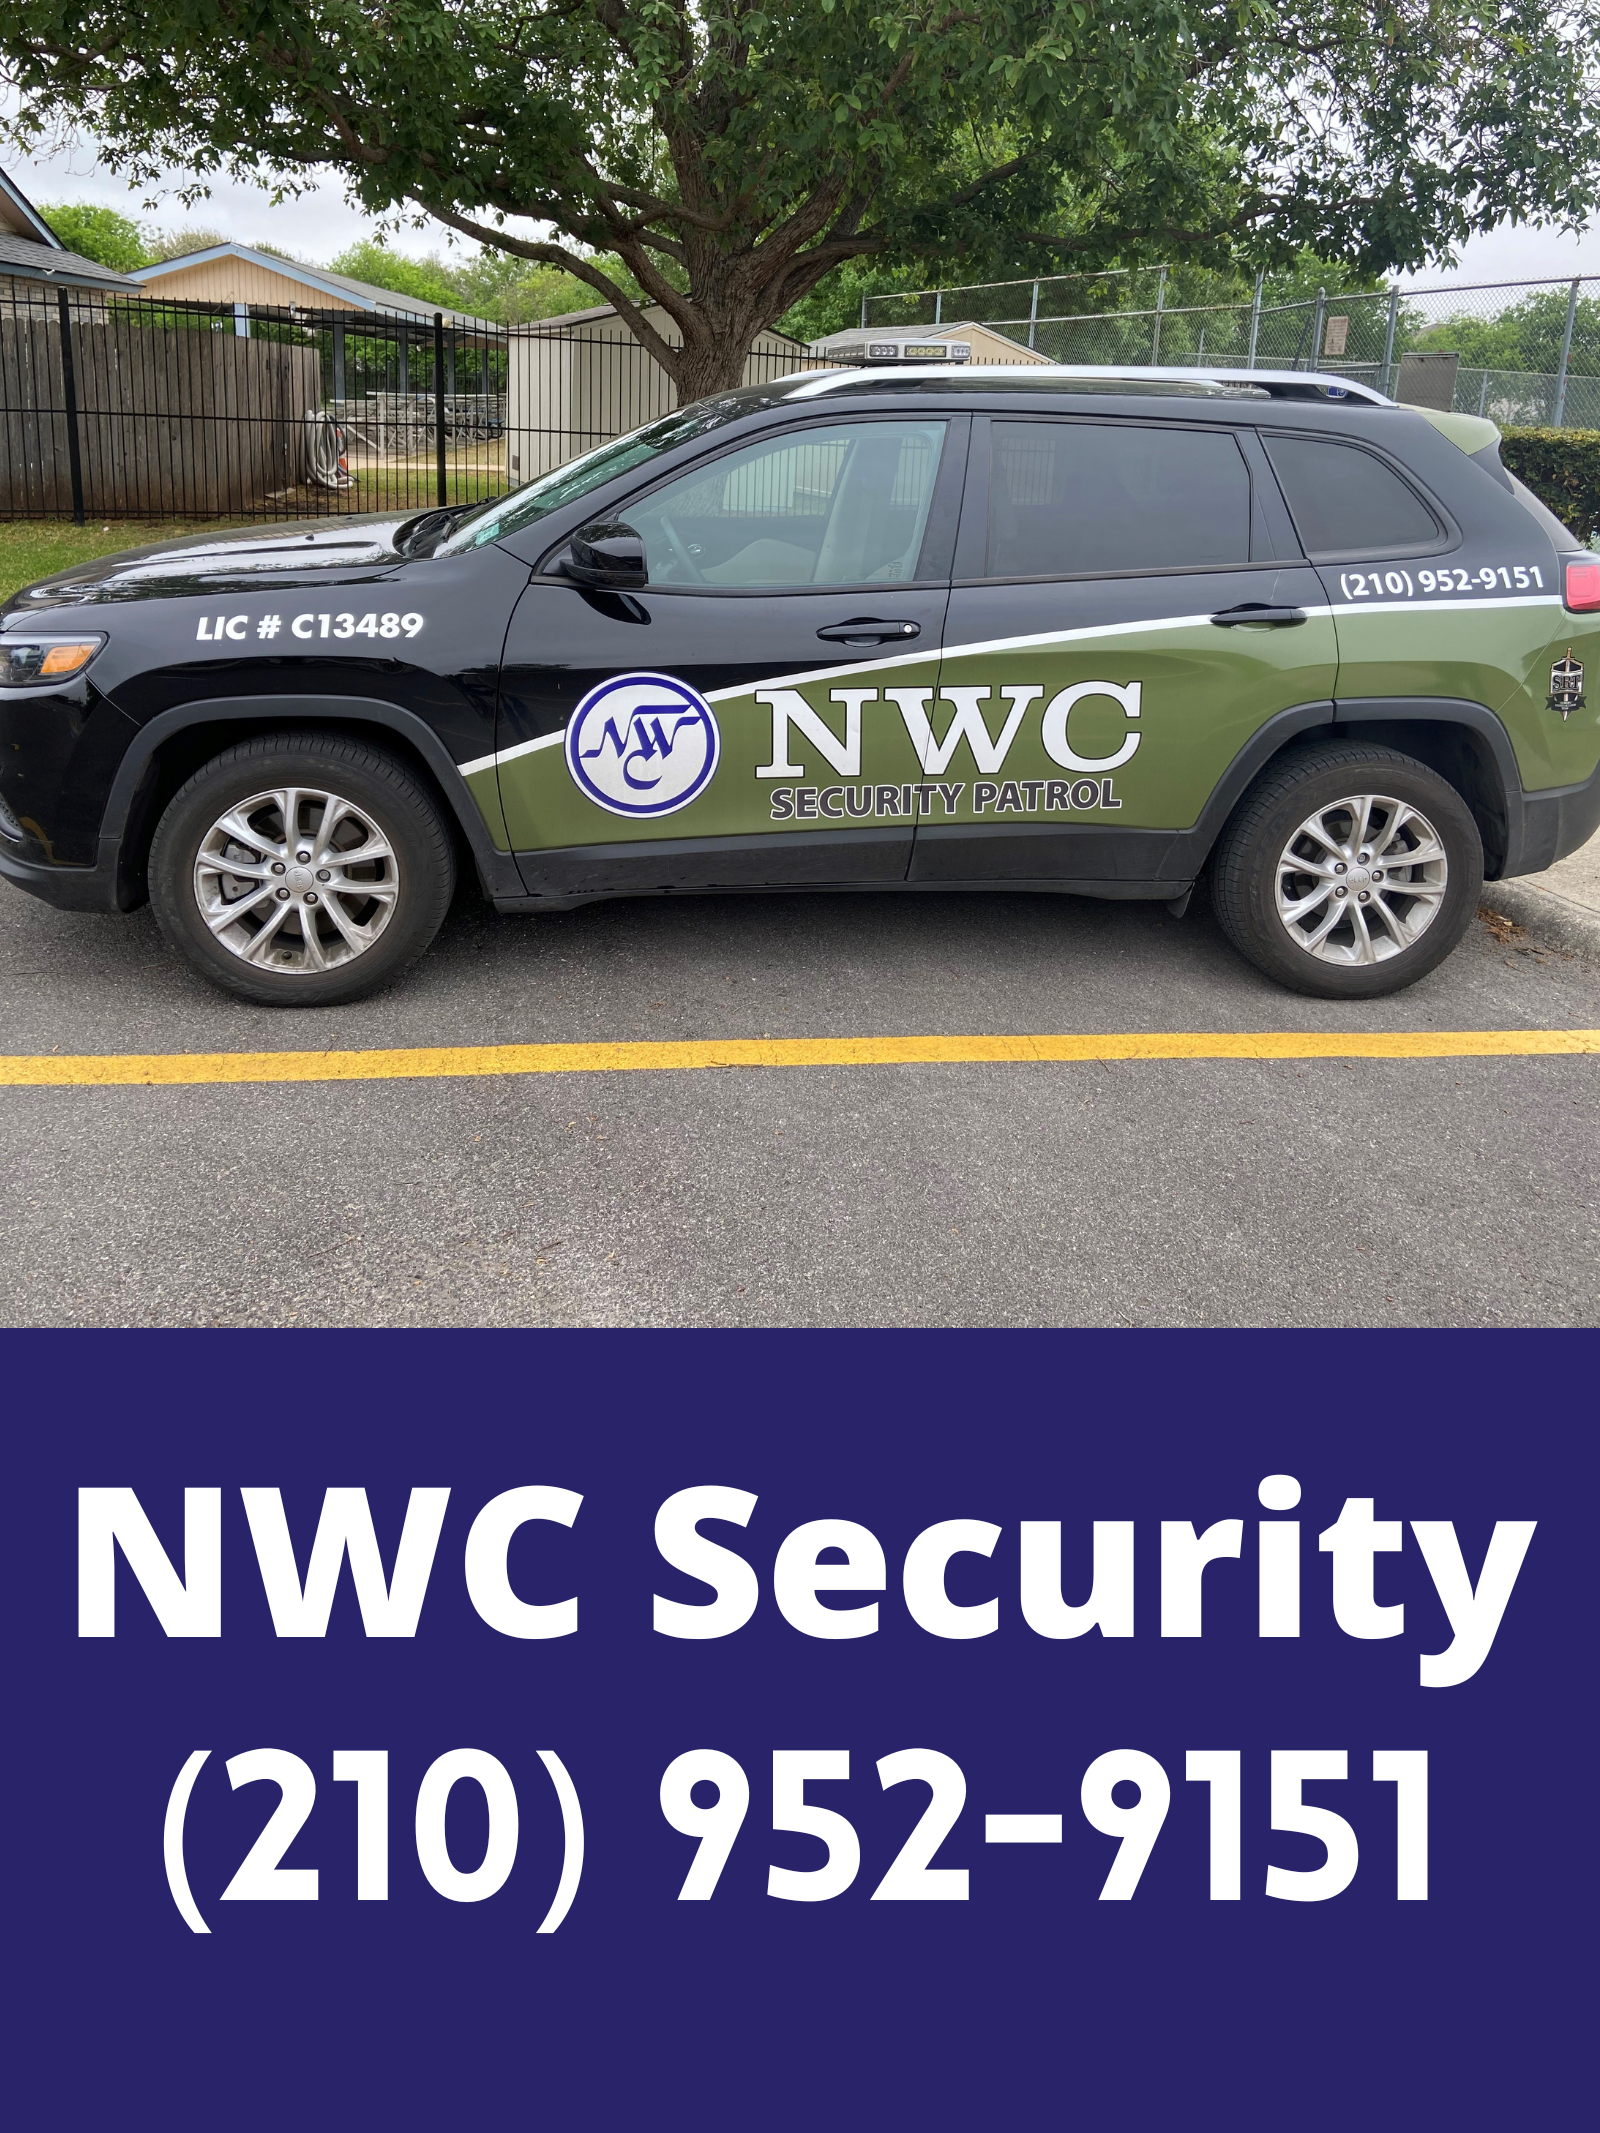 NWC Security (210) 952-9151